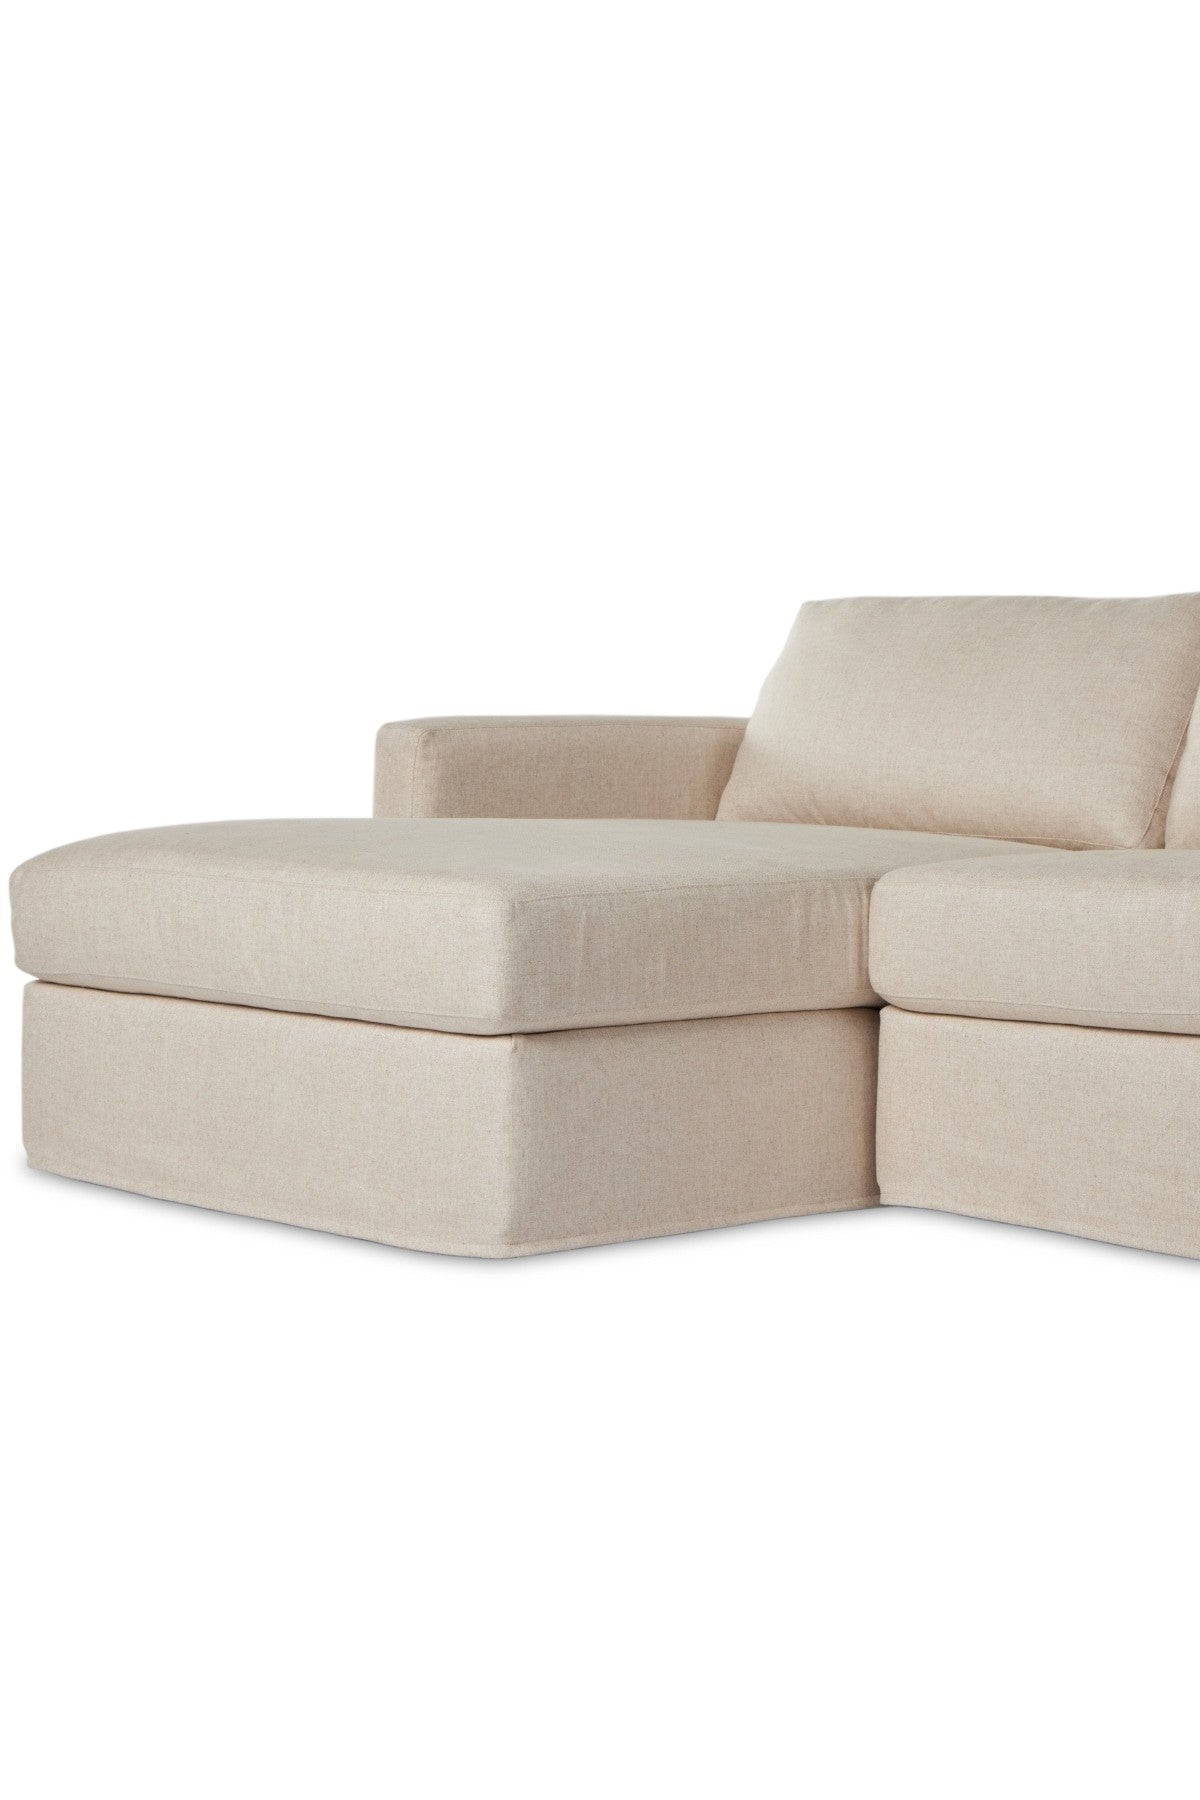 Wescott 2-Piece Slipcover Sectional - Creme - 2 Styles